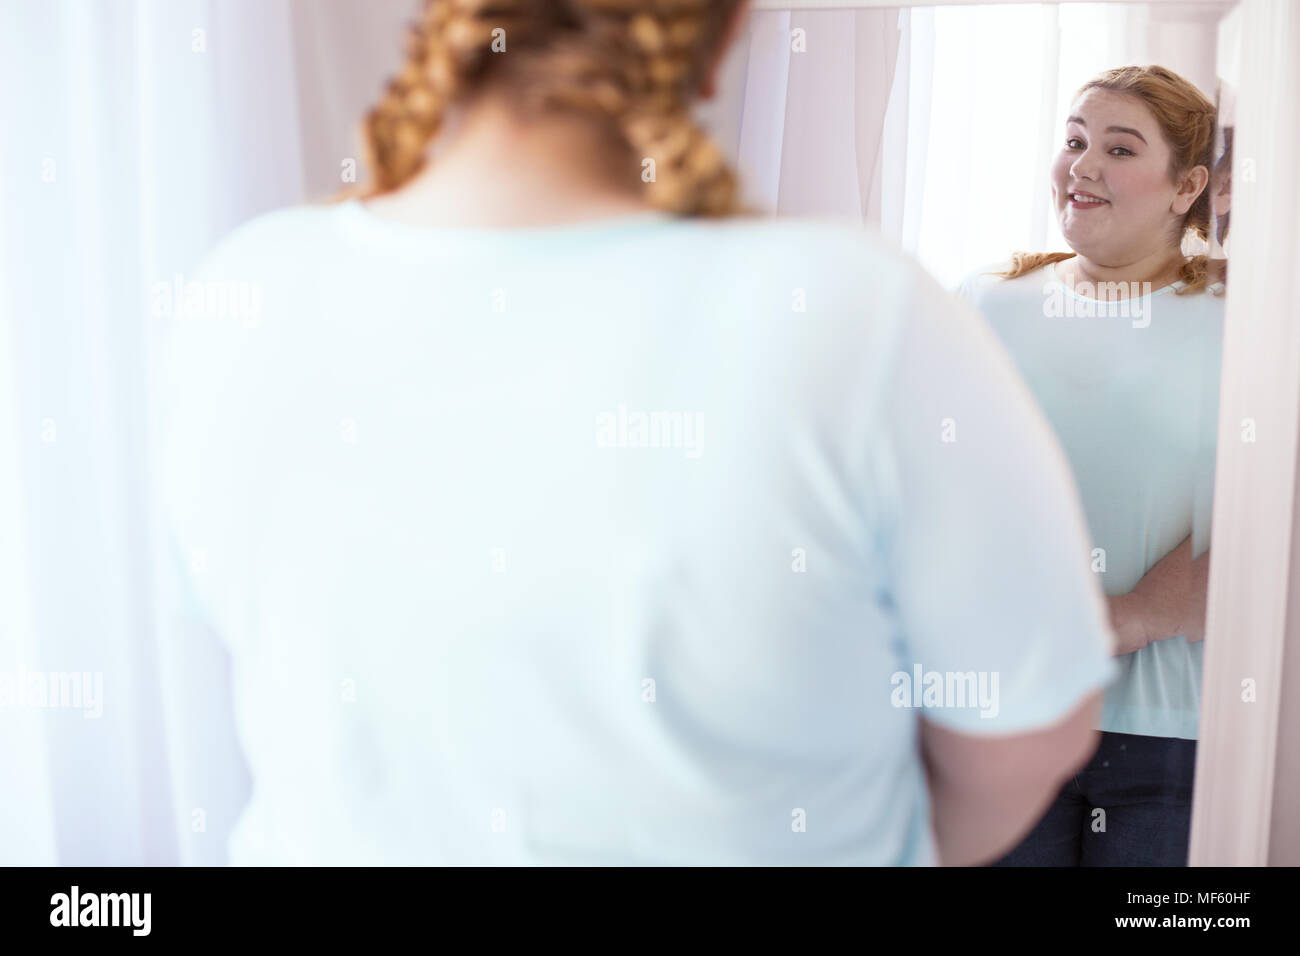 Smiling young woman watching herself in the mirror Stock Photo